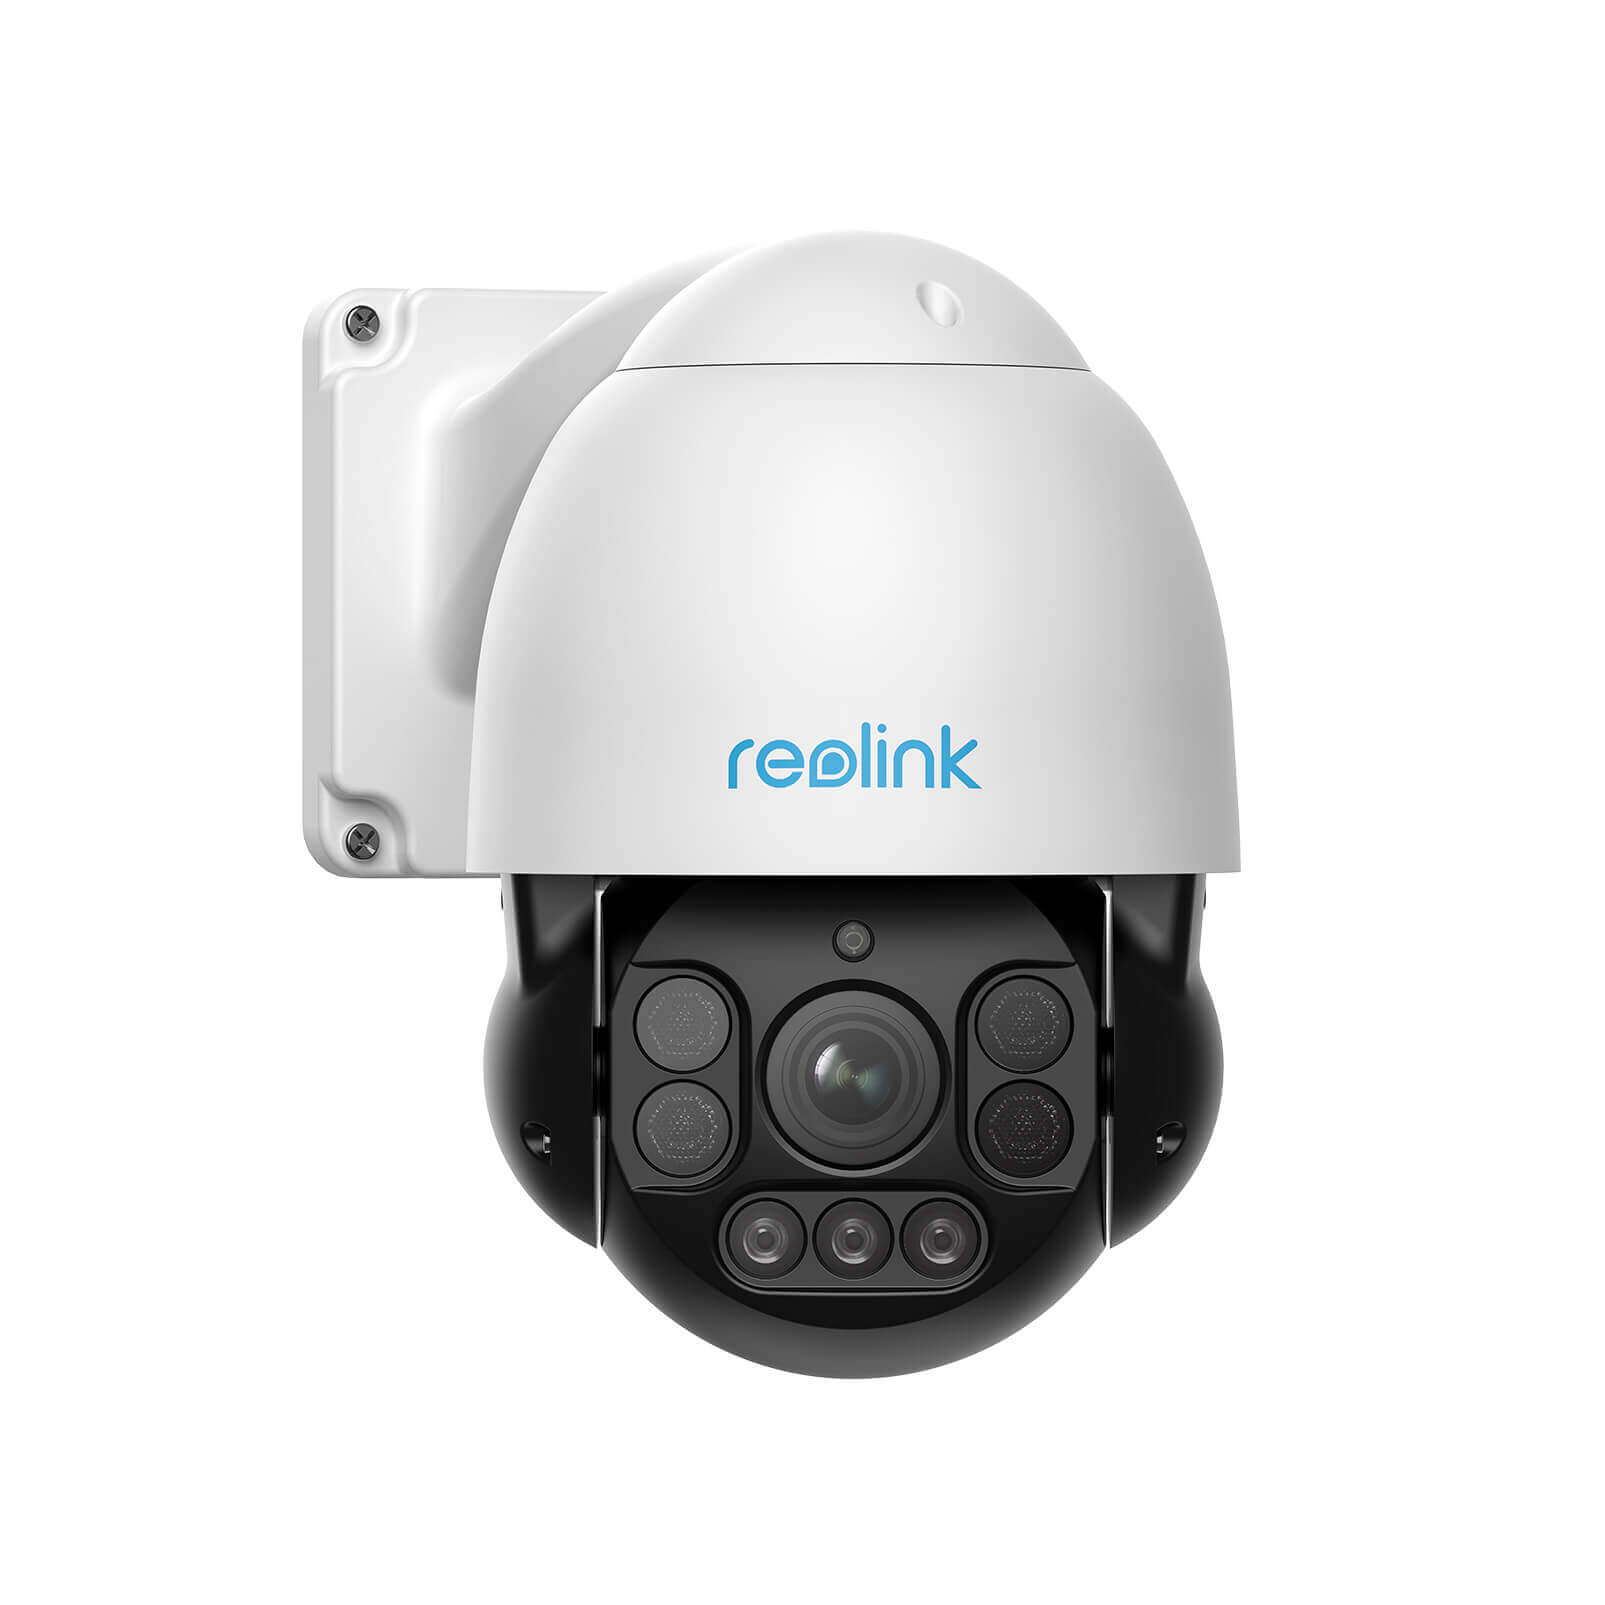 REOLINK 5MP Outdoor WiFi Camera Bundle, 5G WiFi Security Camera, 100ft  Night Vision, Smart Person/Vehicle Detection, Supports RTSP, RLC-510WA